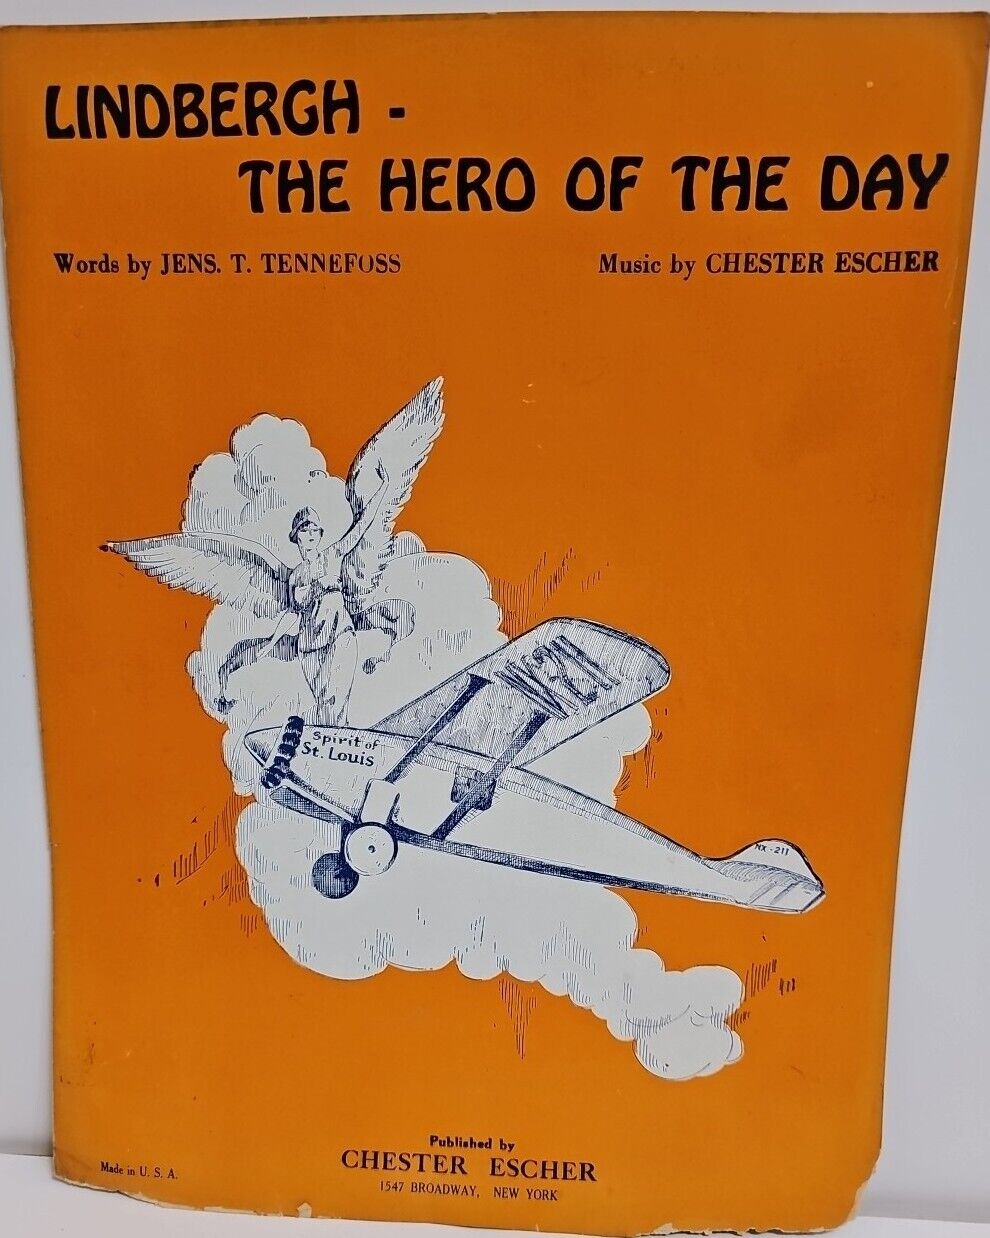 RARE 1928 Charles Lindbergh- The Hero Of The Day Sheet Music Spirit Of St. Louis